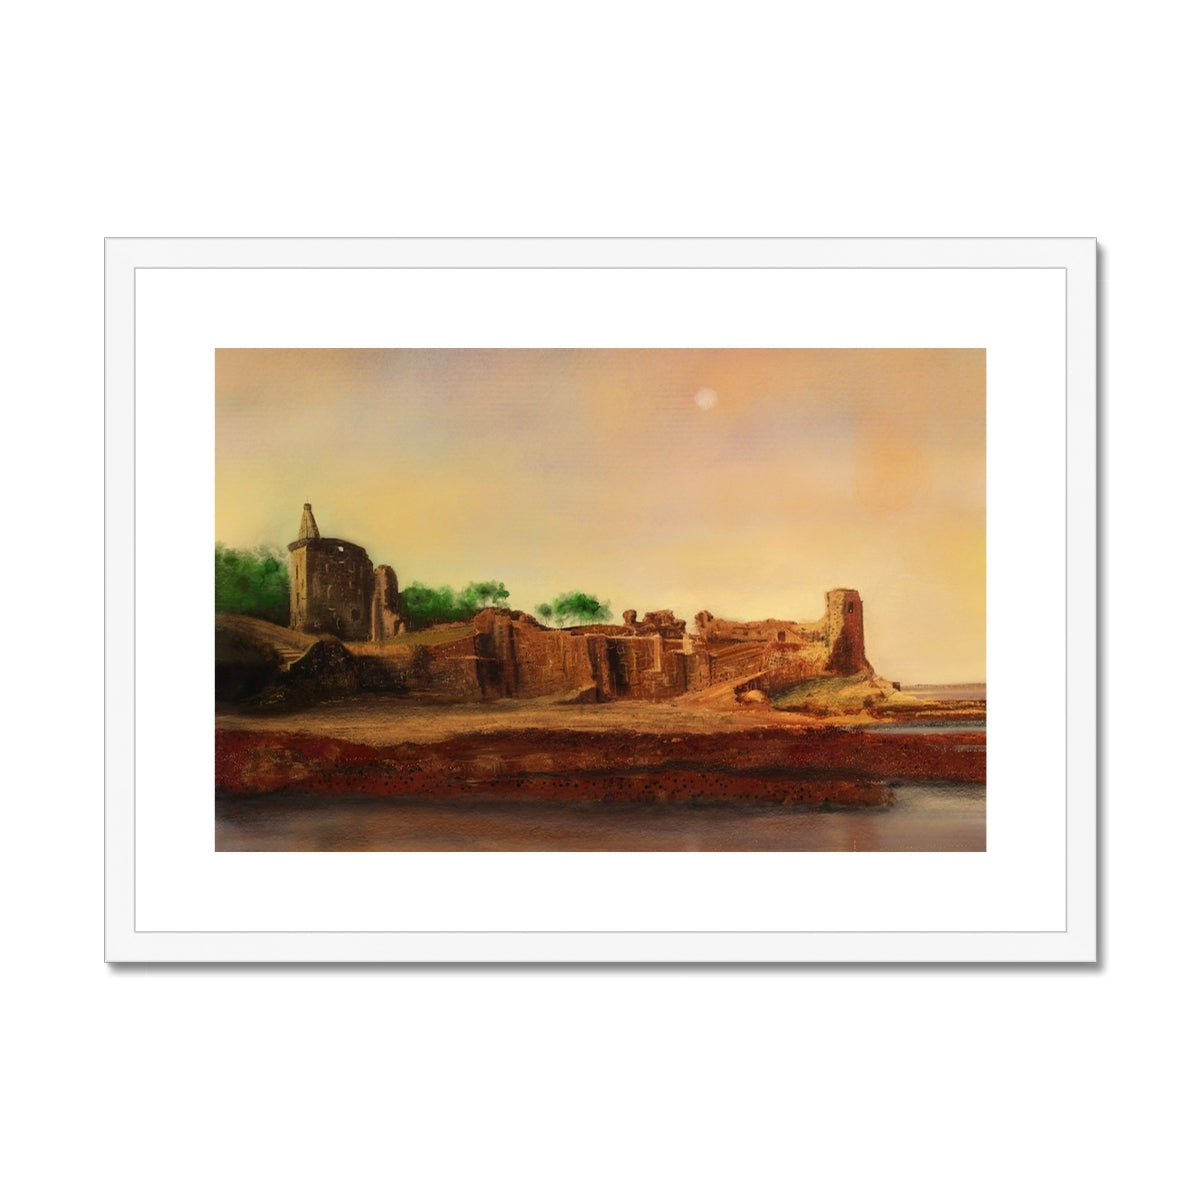 St Andrews Castle Painting | Framed & Mounted Prints From Scotland-Framed & Mounted Prints-Historic & Iconic Scotland Art Gallery-A2 Landscape-White Frame-Paintings, Prints, Homeware, Art Gifts From Scotland By Scottish Artist Kevin Hunter